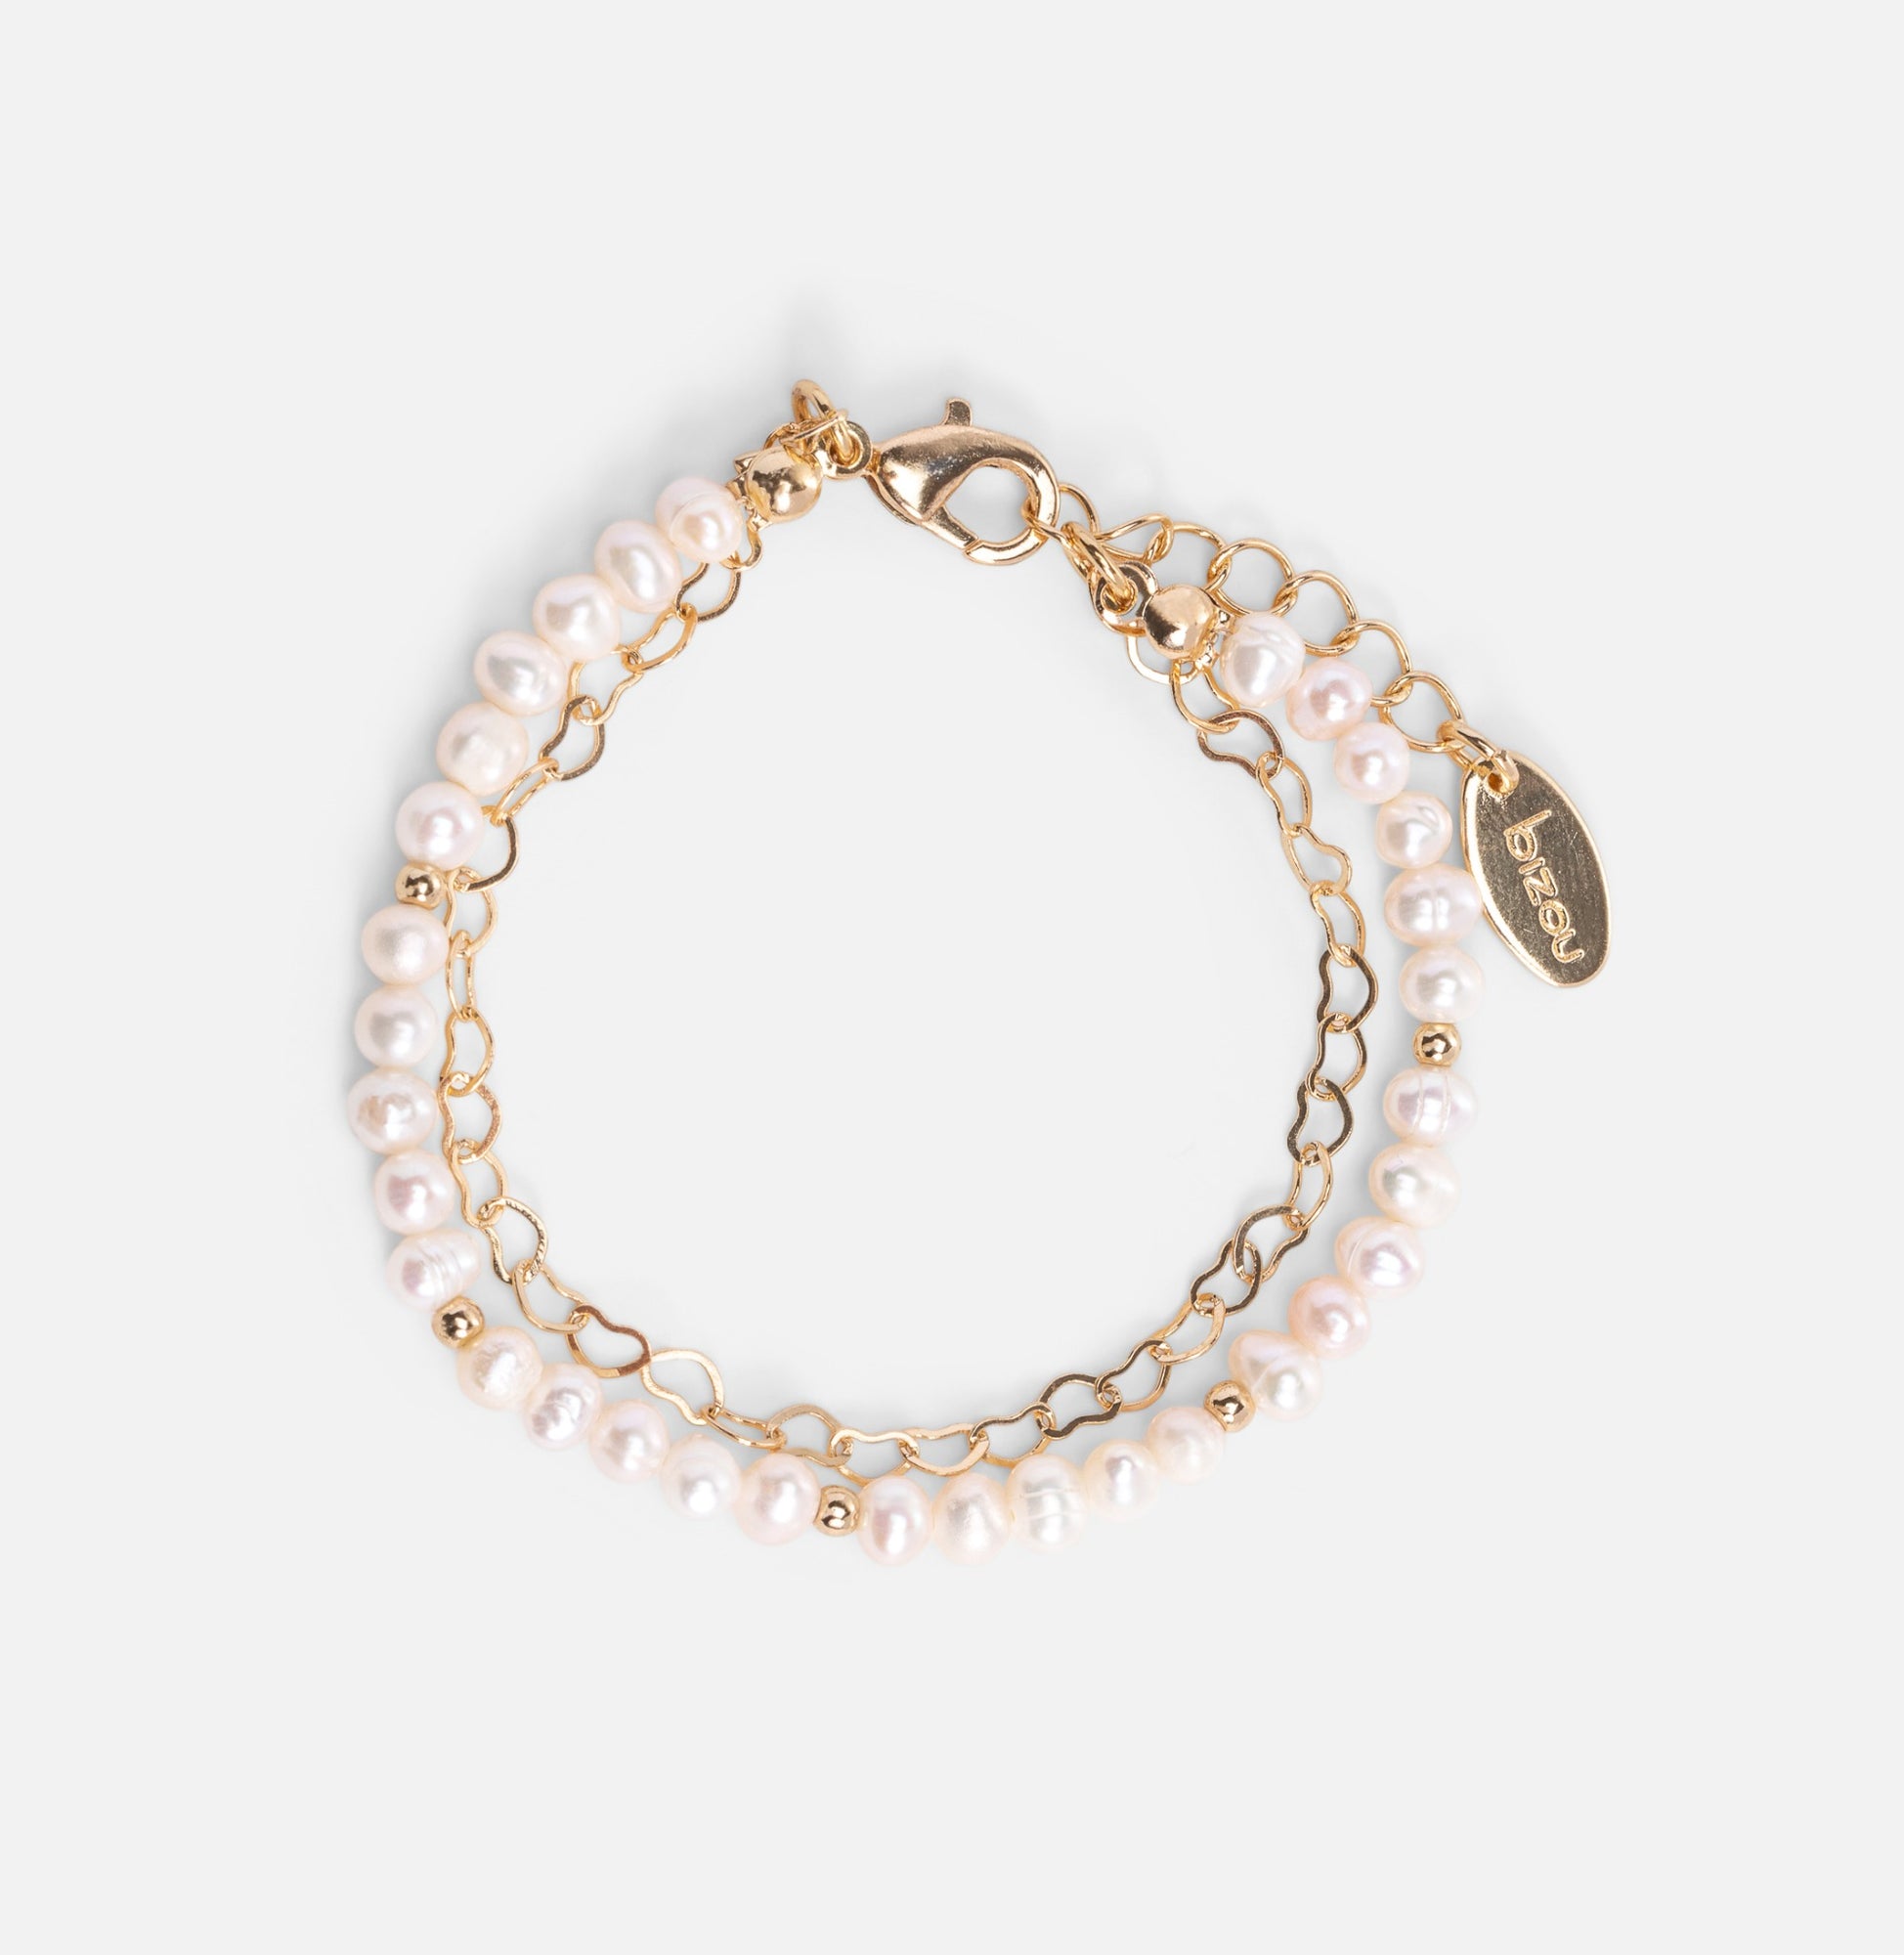 Golden bracelet with heart and pearl chains 